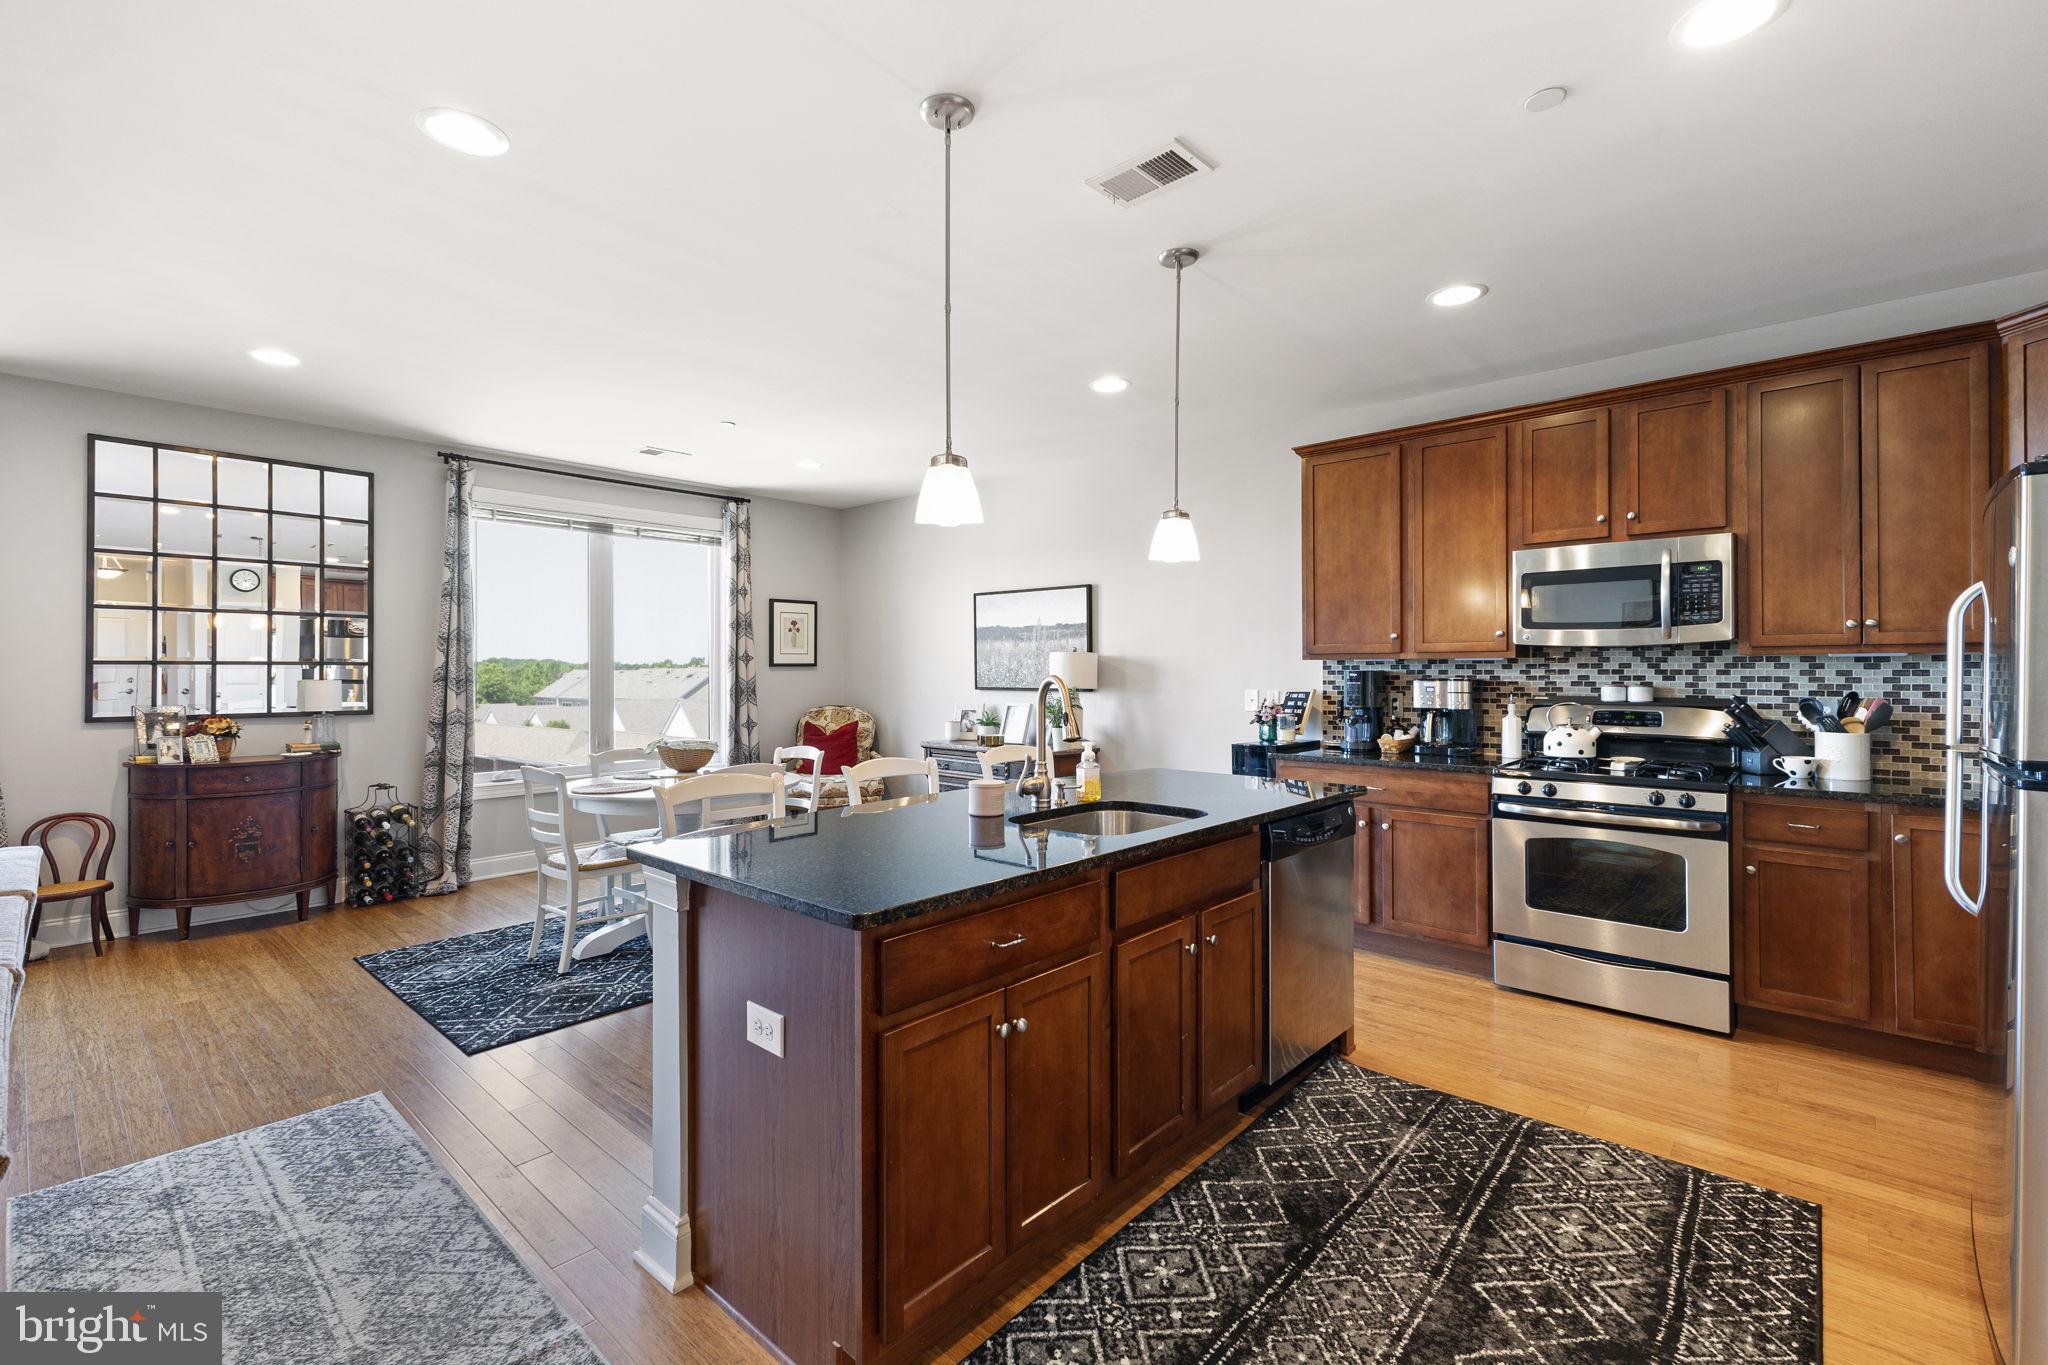 a kitchen with stainless steel appliances kitchen island granite countertop a sink counter space cabinets and a window